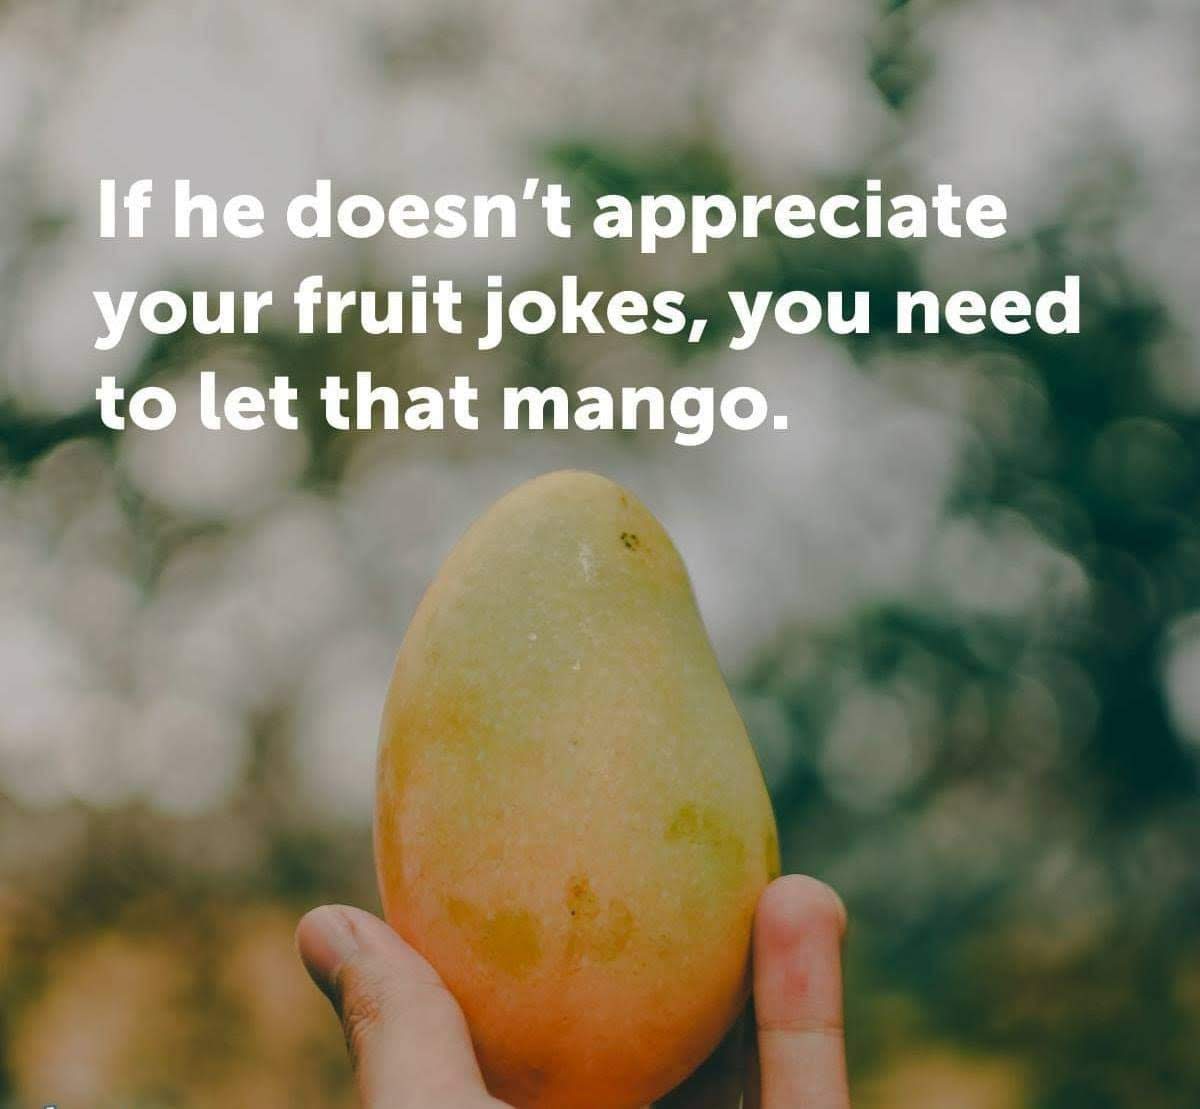 Funny memes for her - Joke - If he doesn't appreciate your fruit jokes, you need to let that mango.